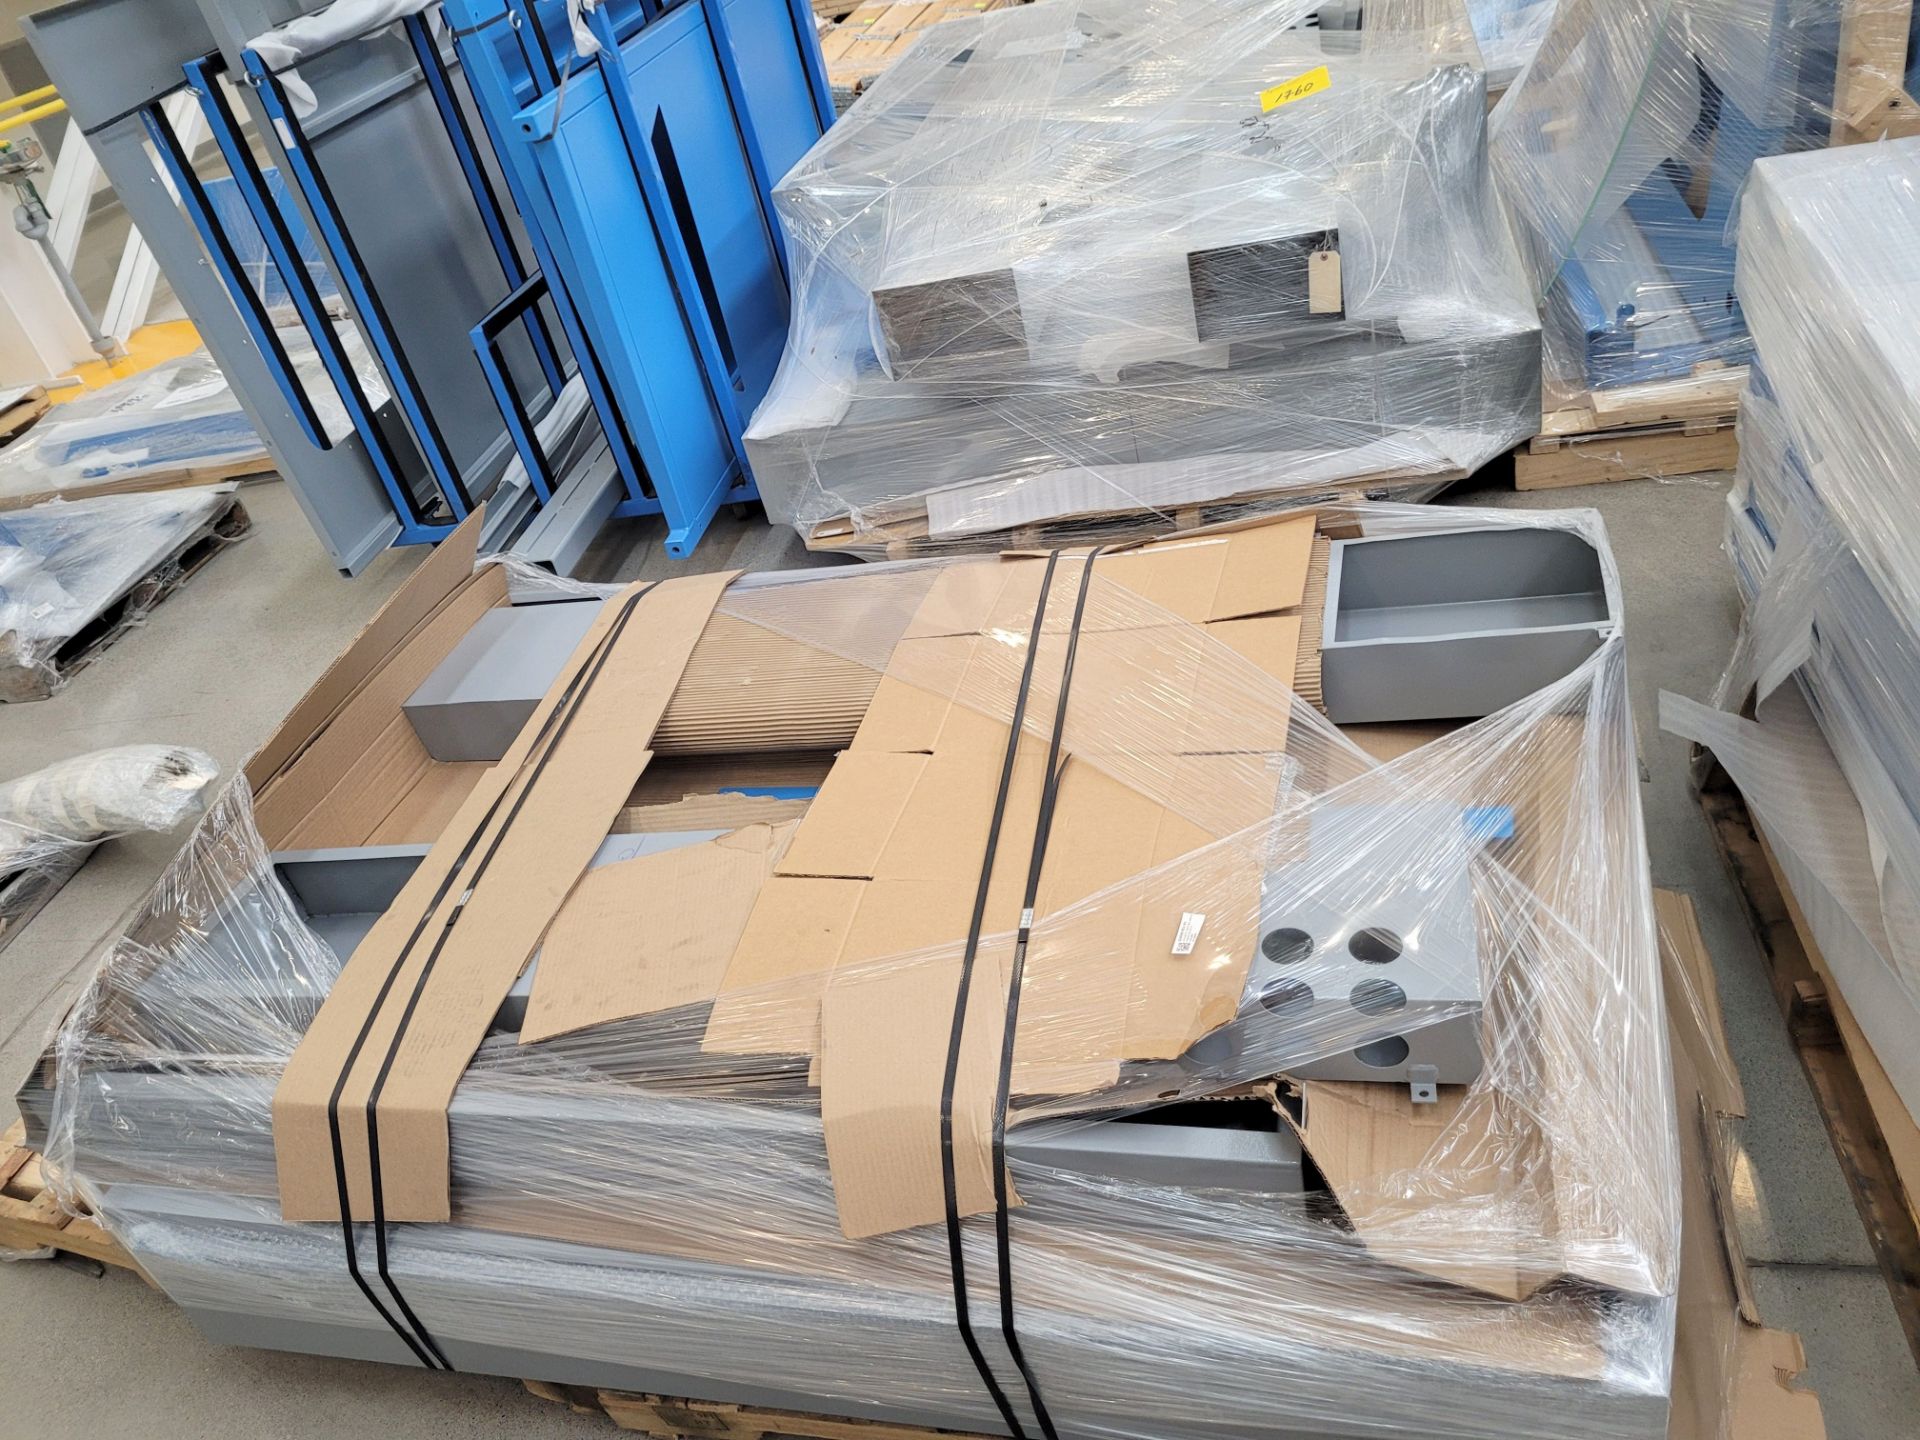 LOT - APPROX 15 PALLETS OF MACHINE BEAMS, GATES, EXTRUDER GUARDS, ROOF ASSMEBLYS, ENCLOSURES, - Image 10 of 10